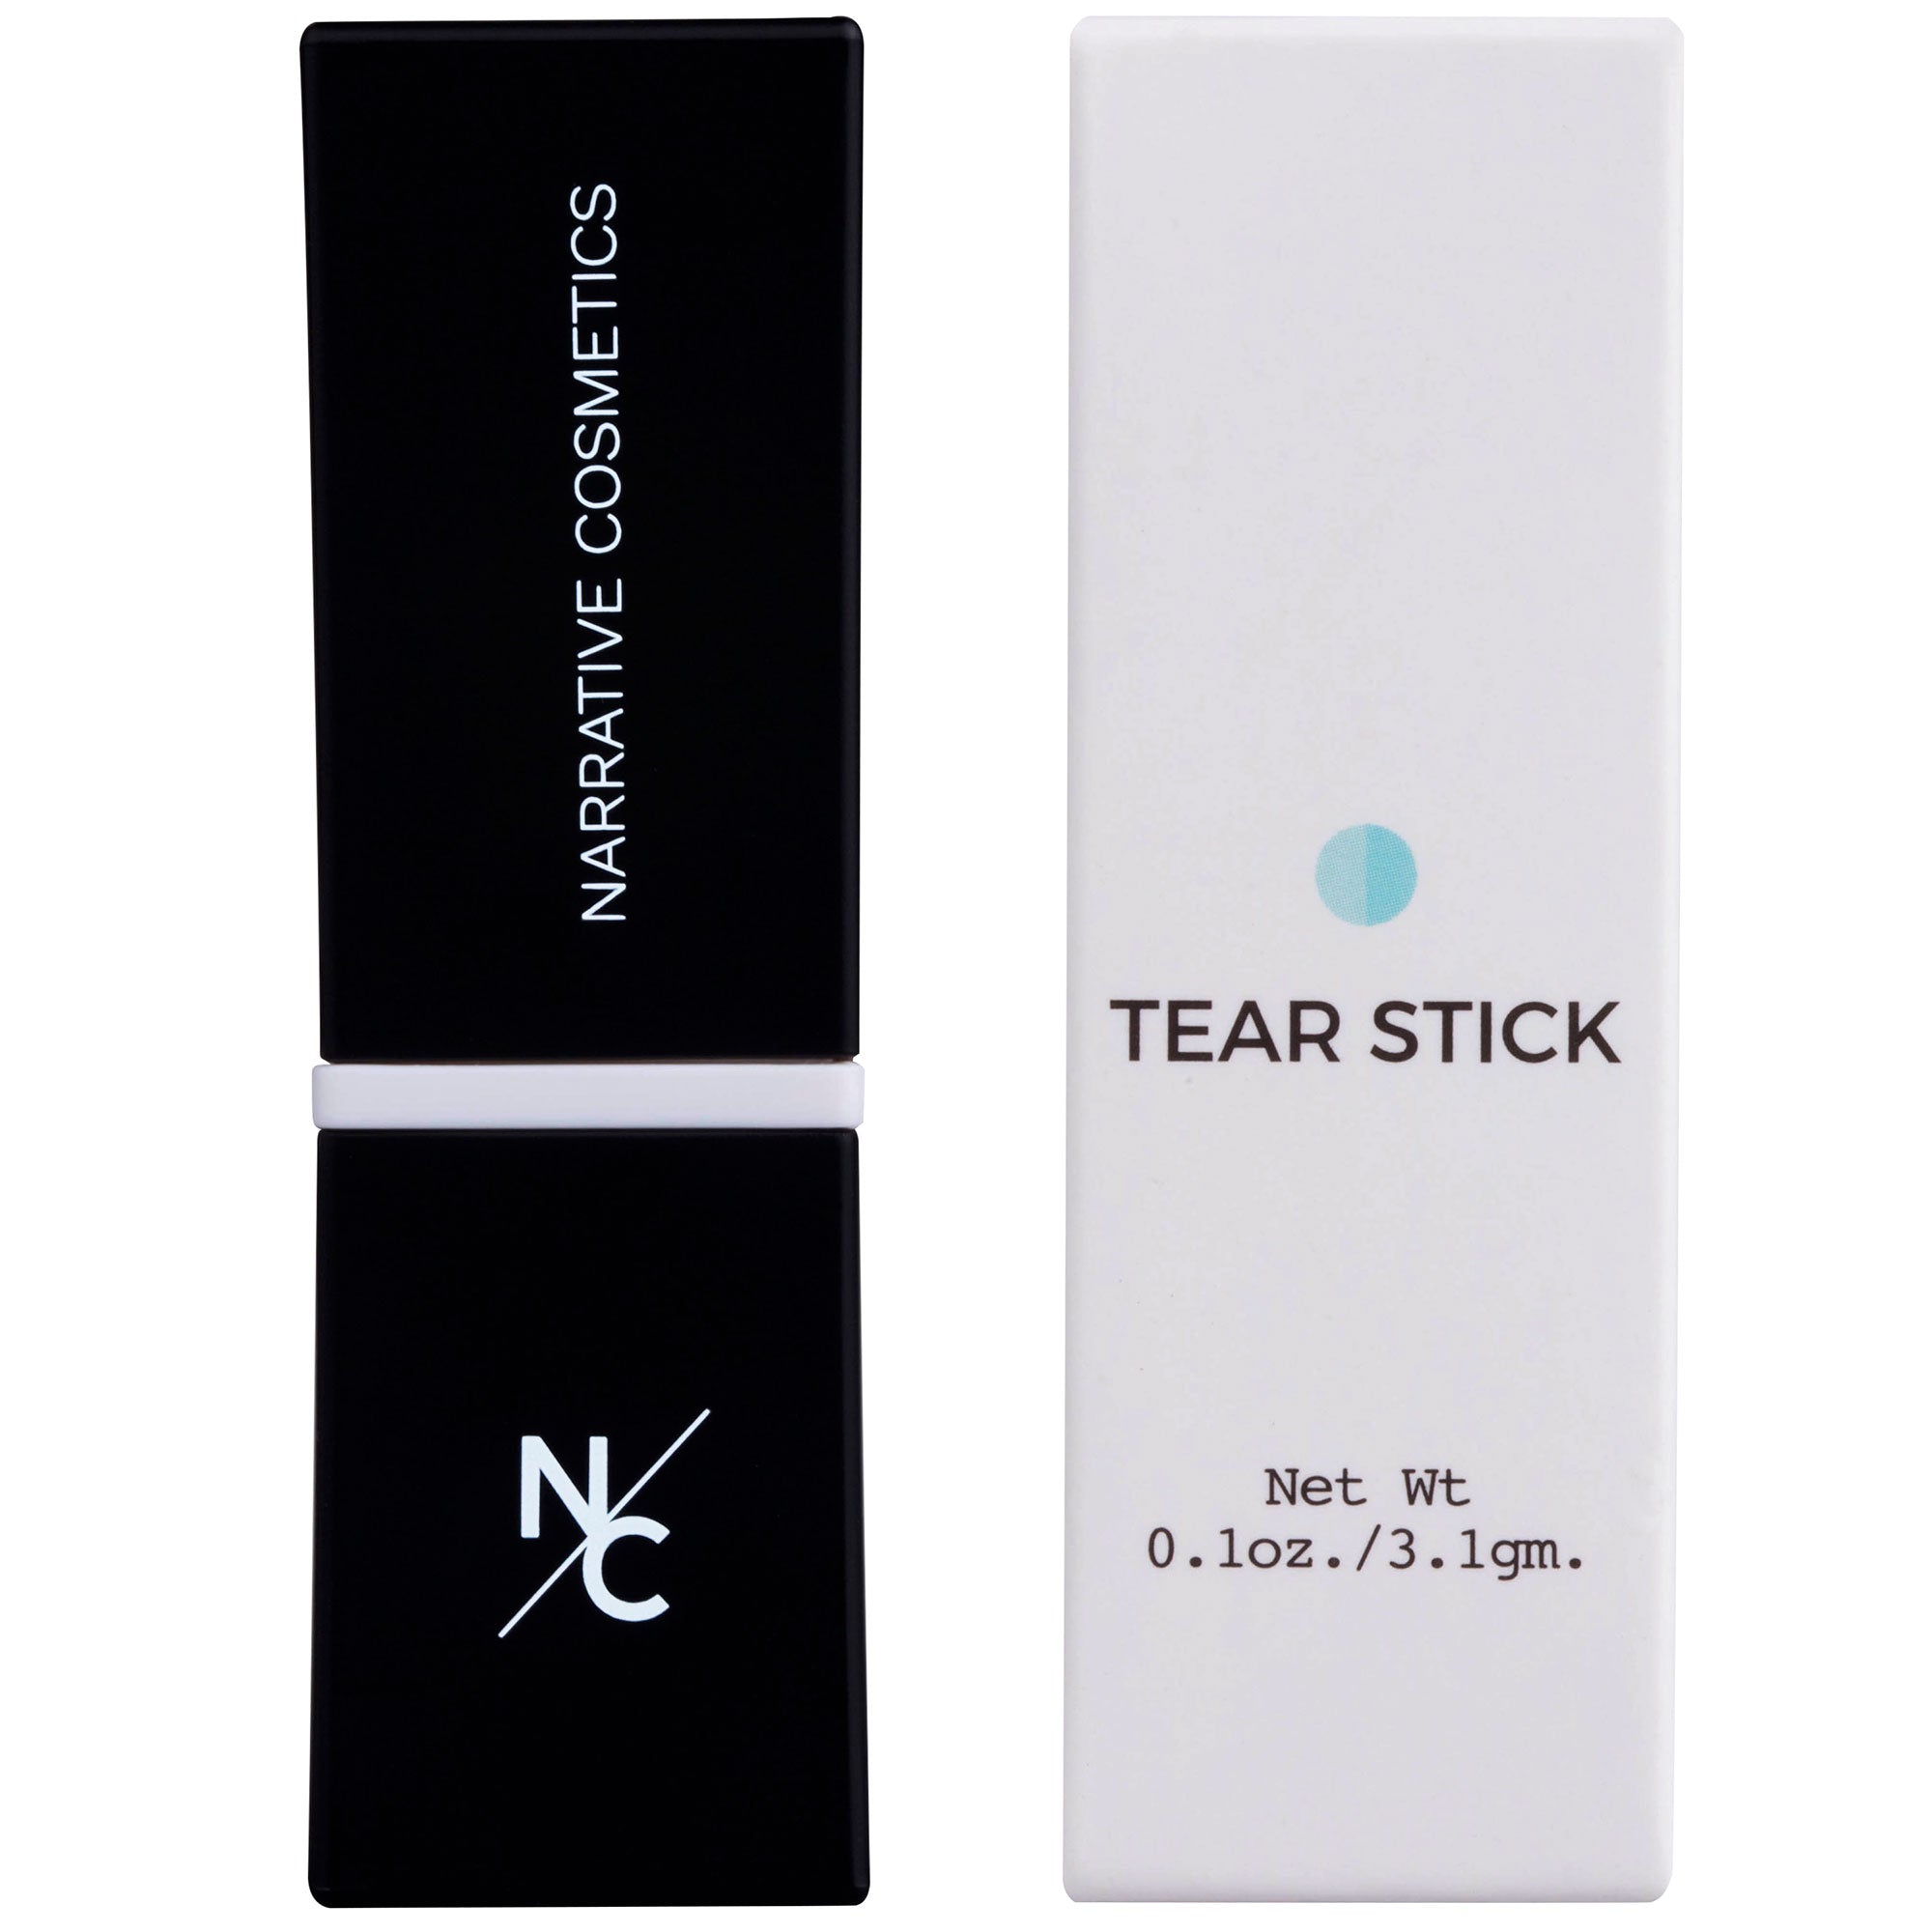 Tear Stick: Rub underneath your eyes to cry on command!